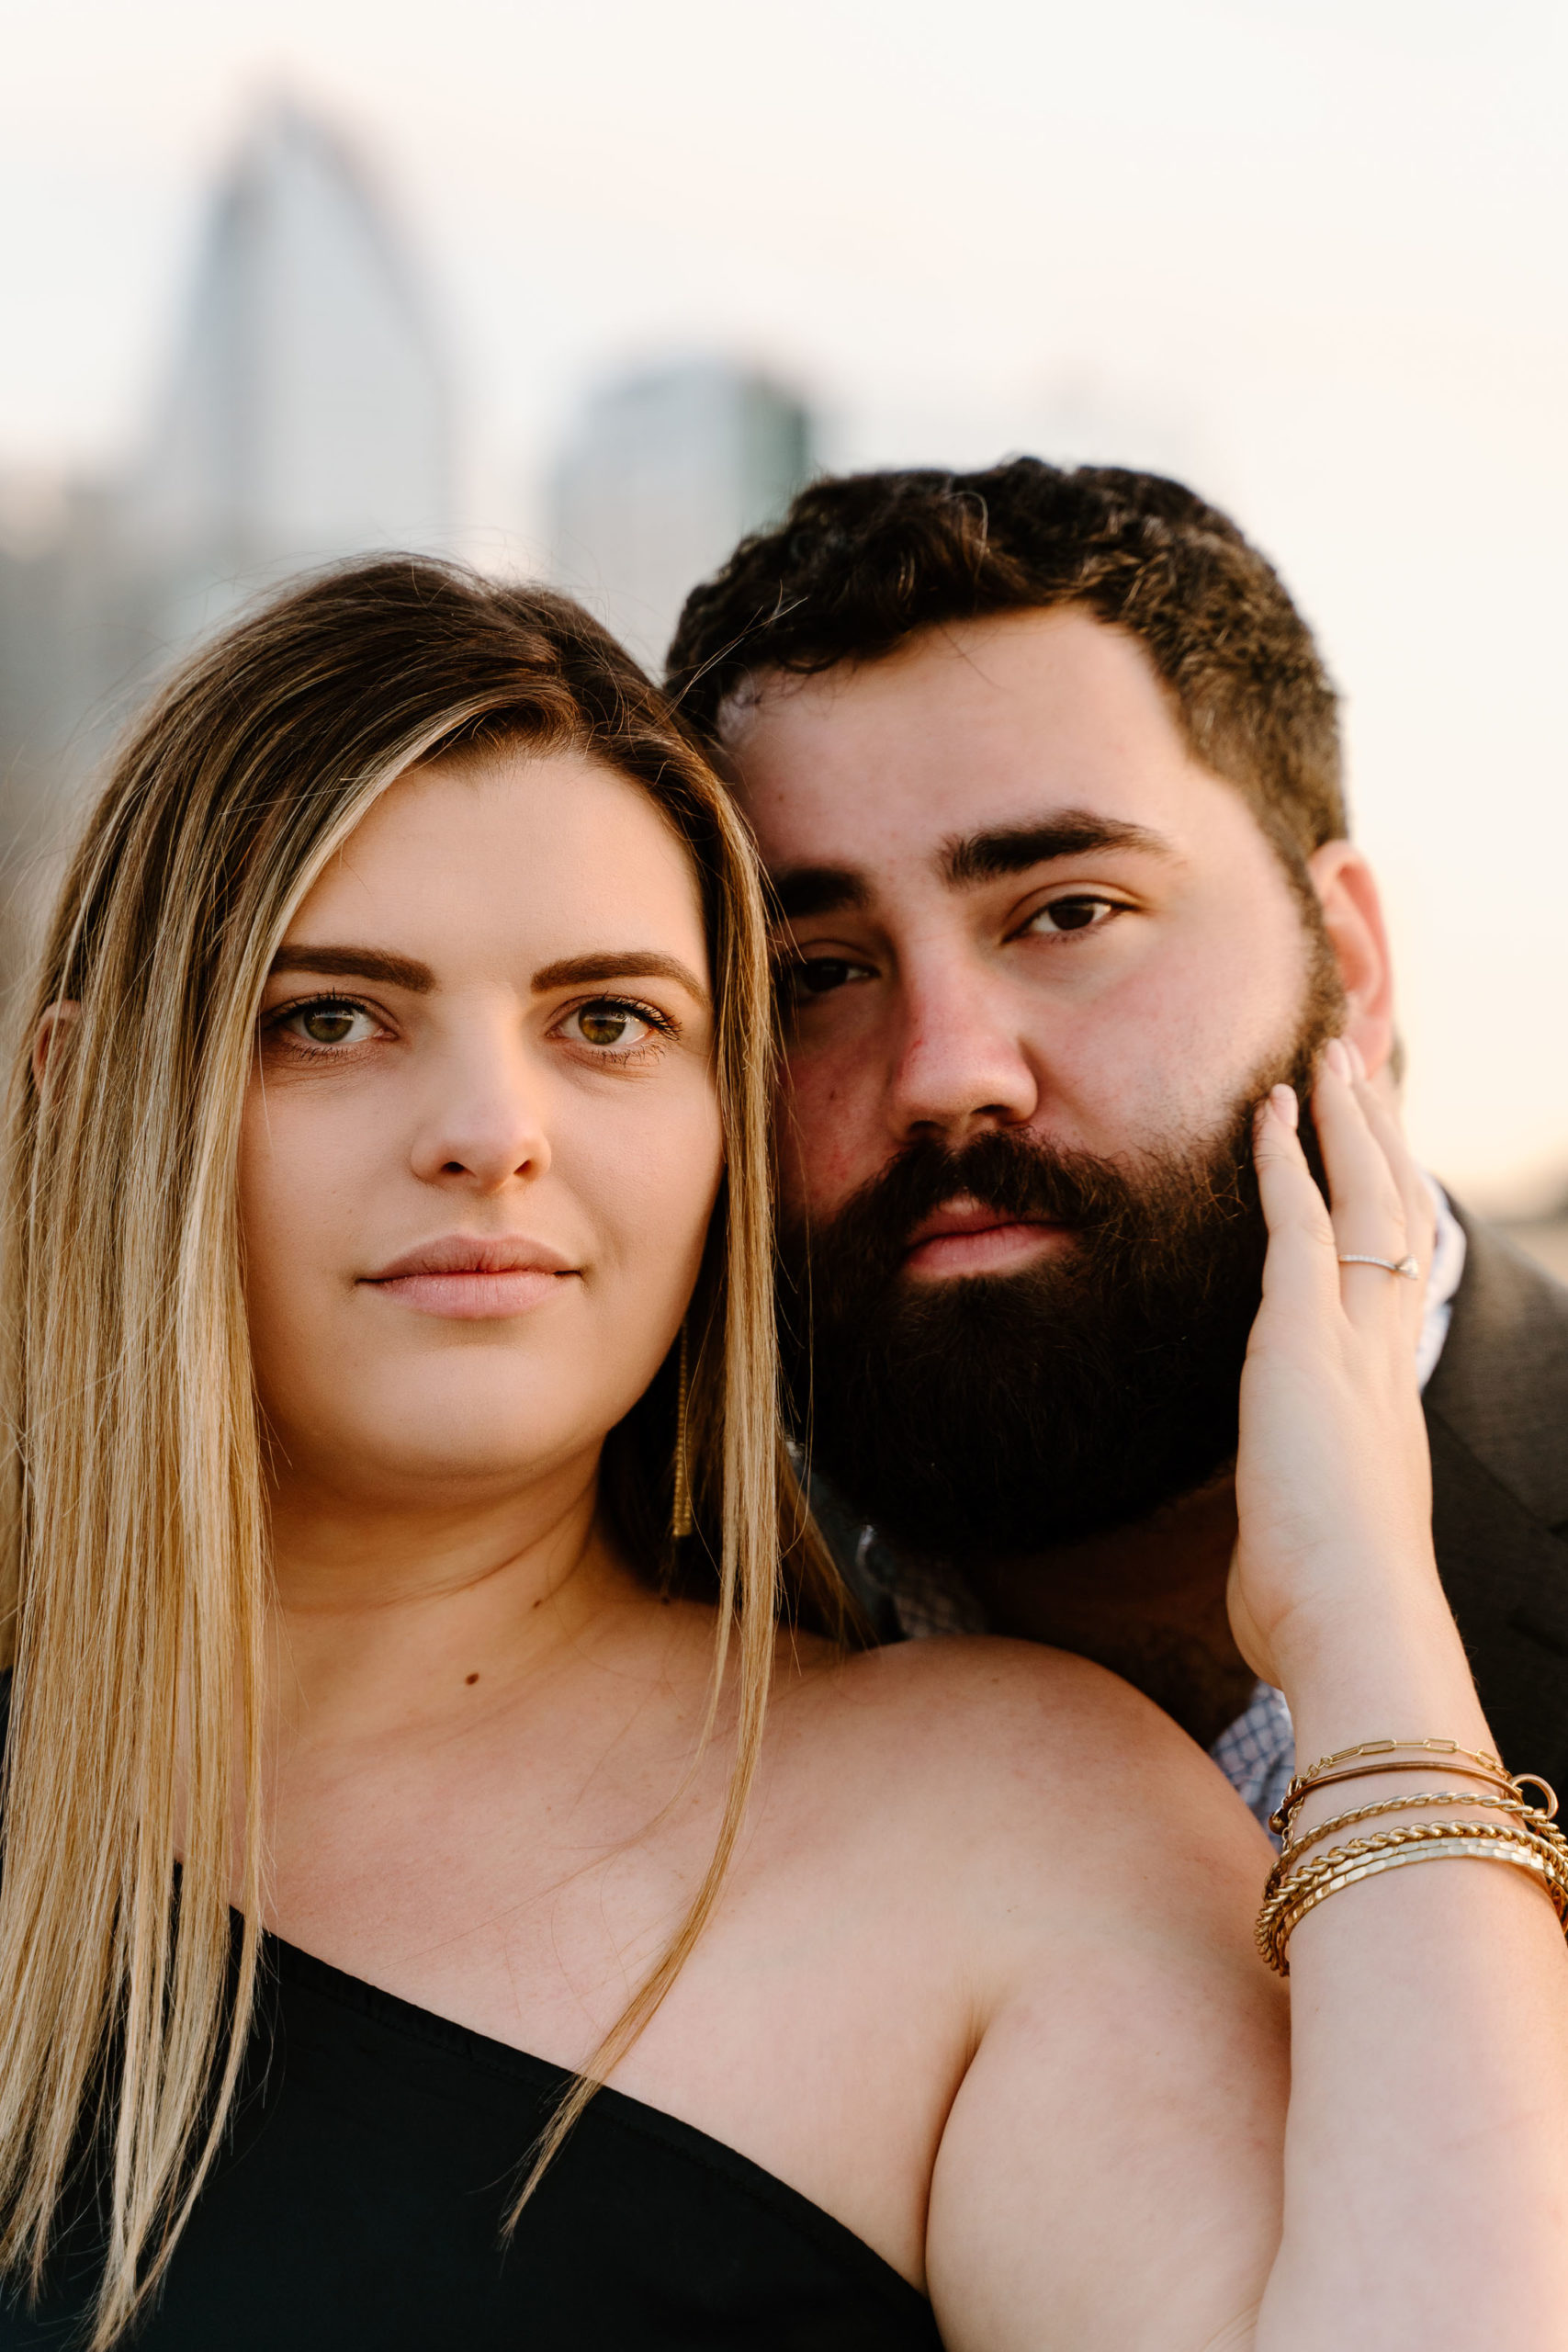 Uptown Charlotte Engagement Photos with Skyline Views